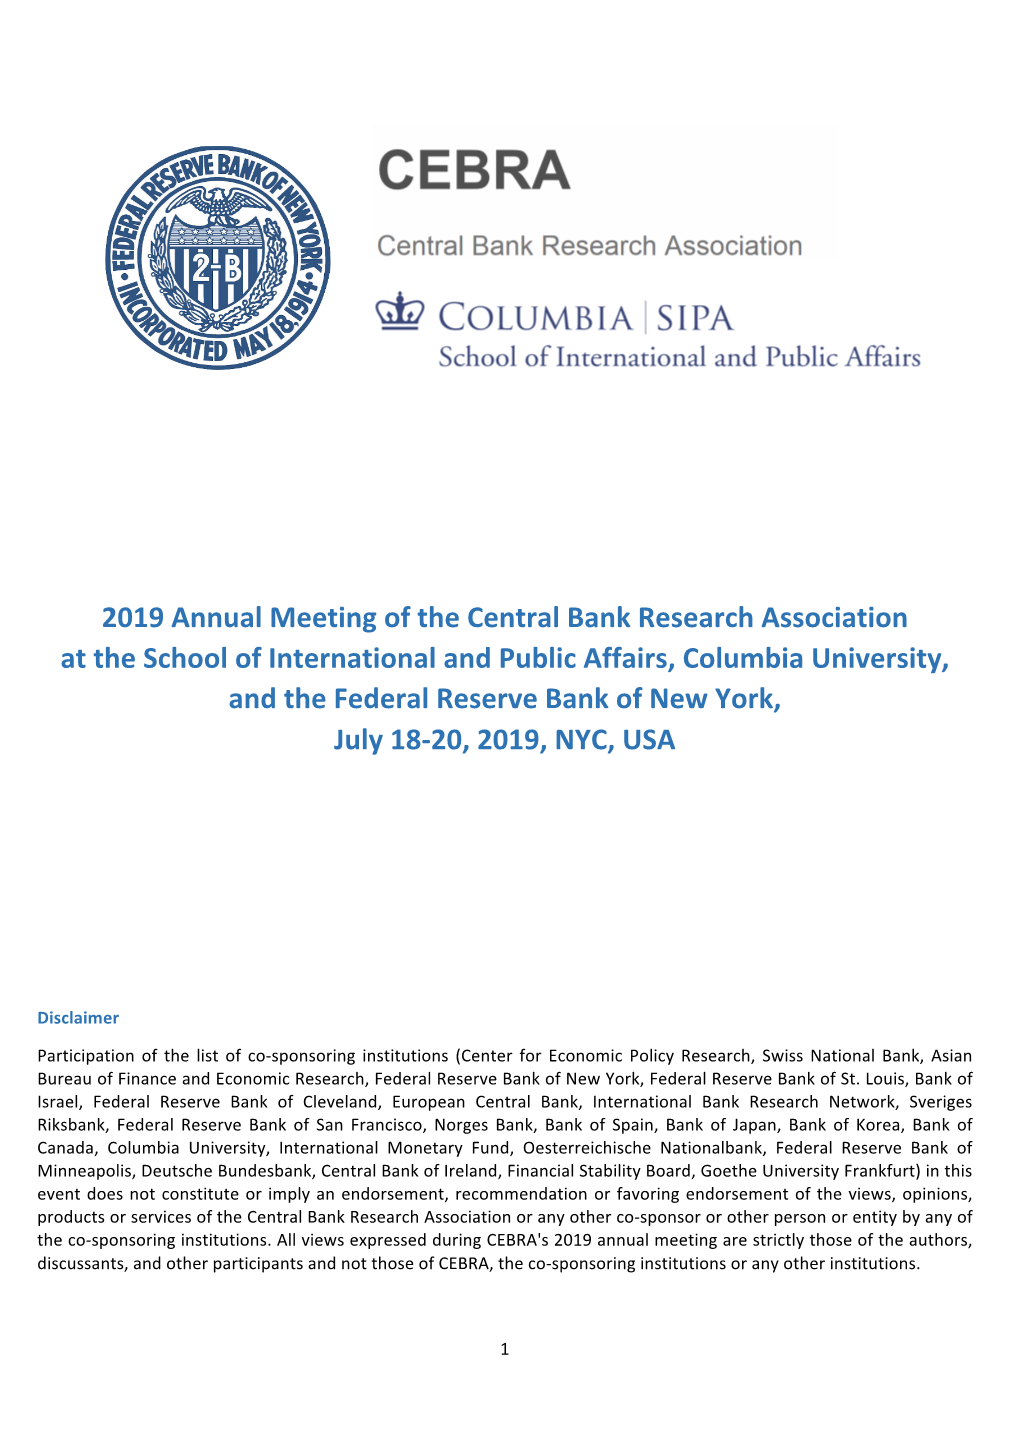 2019 Annual Meeting of the Central Bank Research Association at The